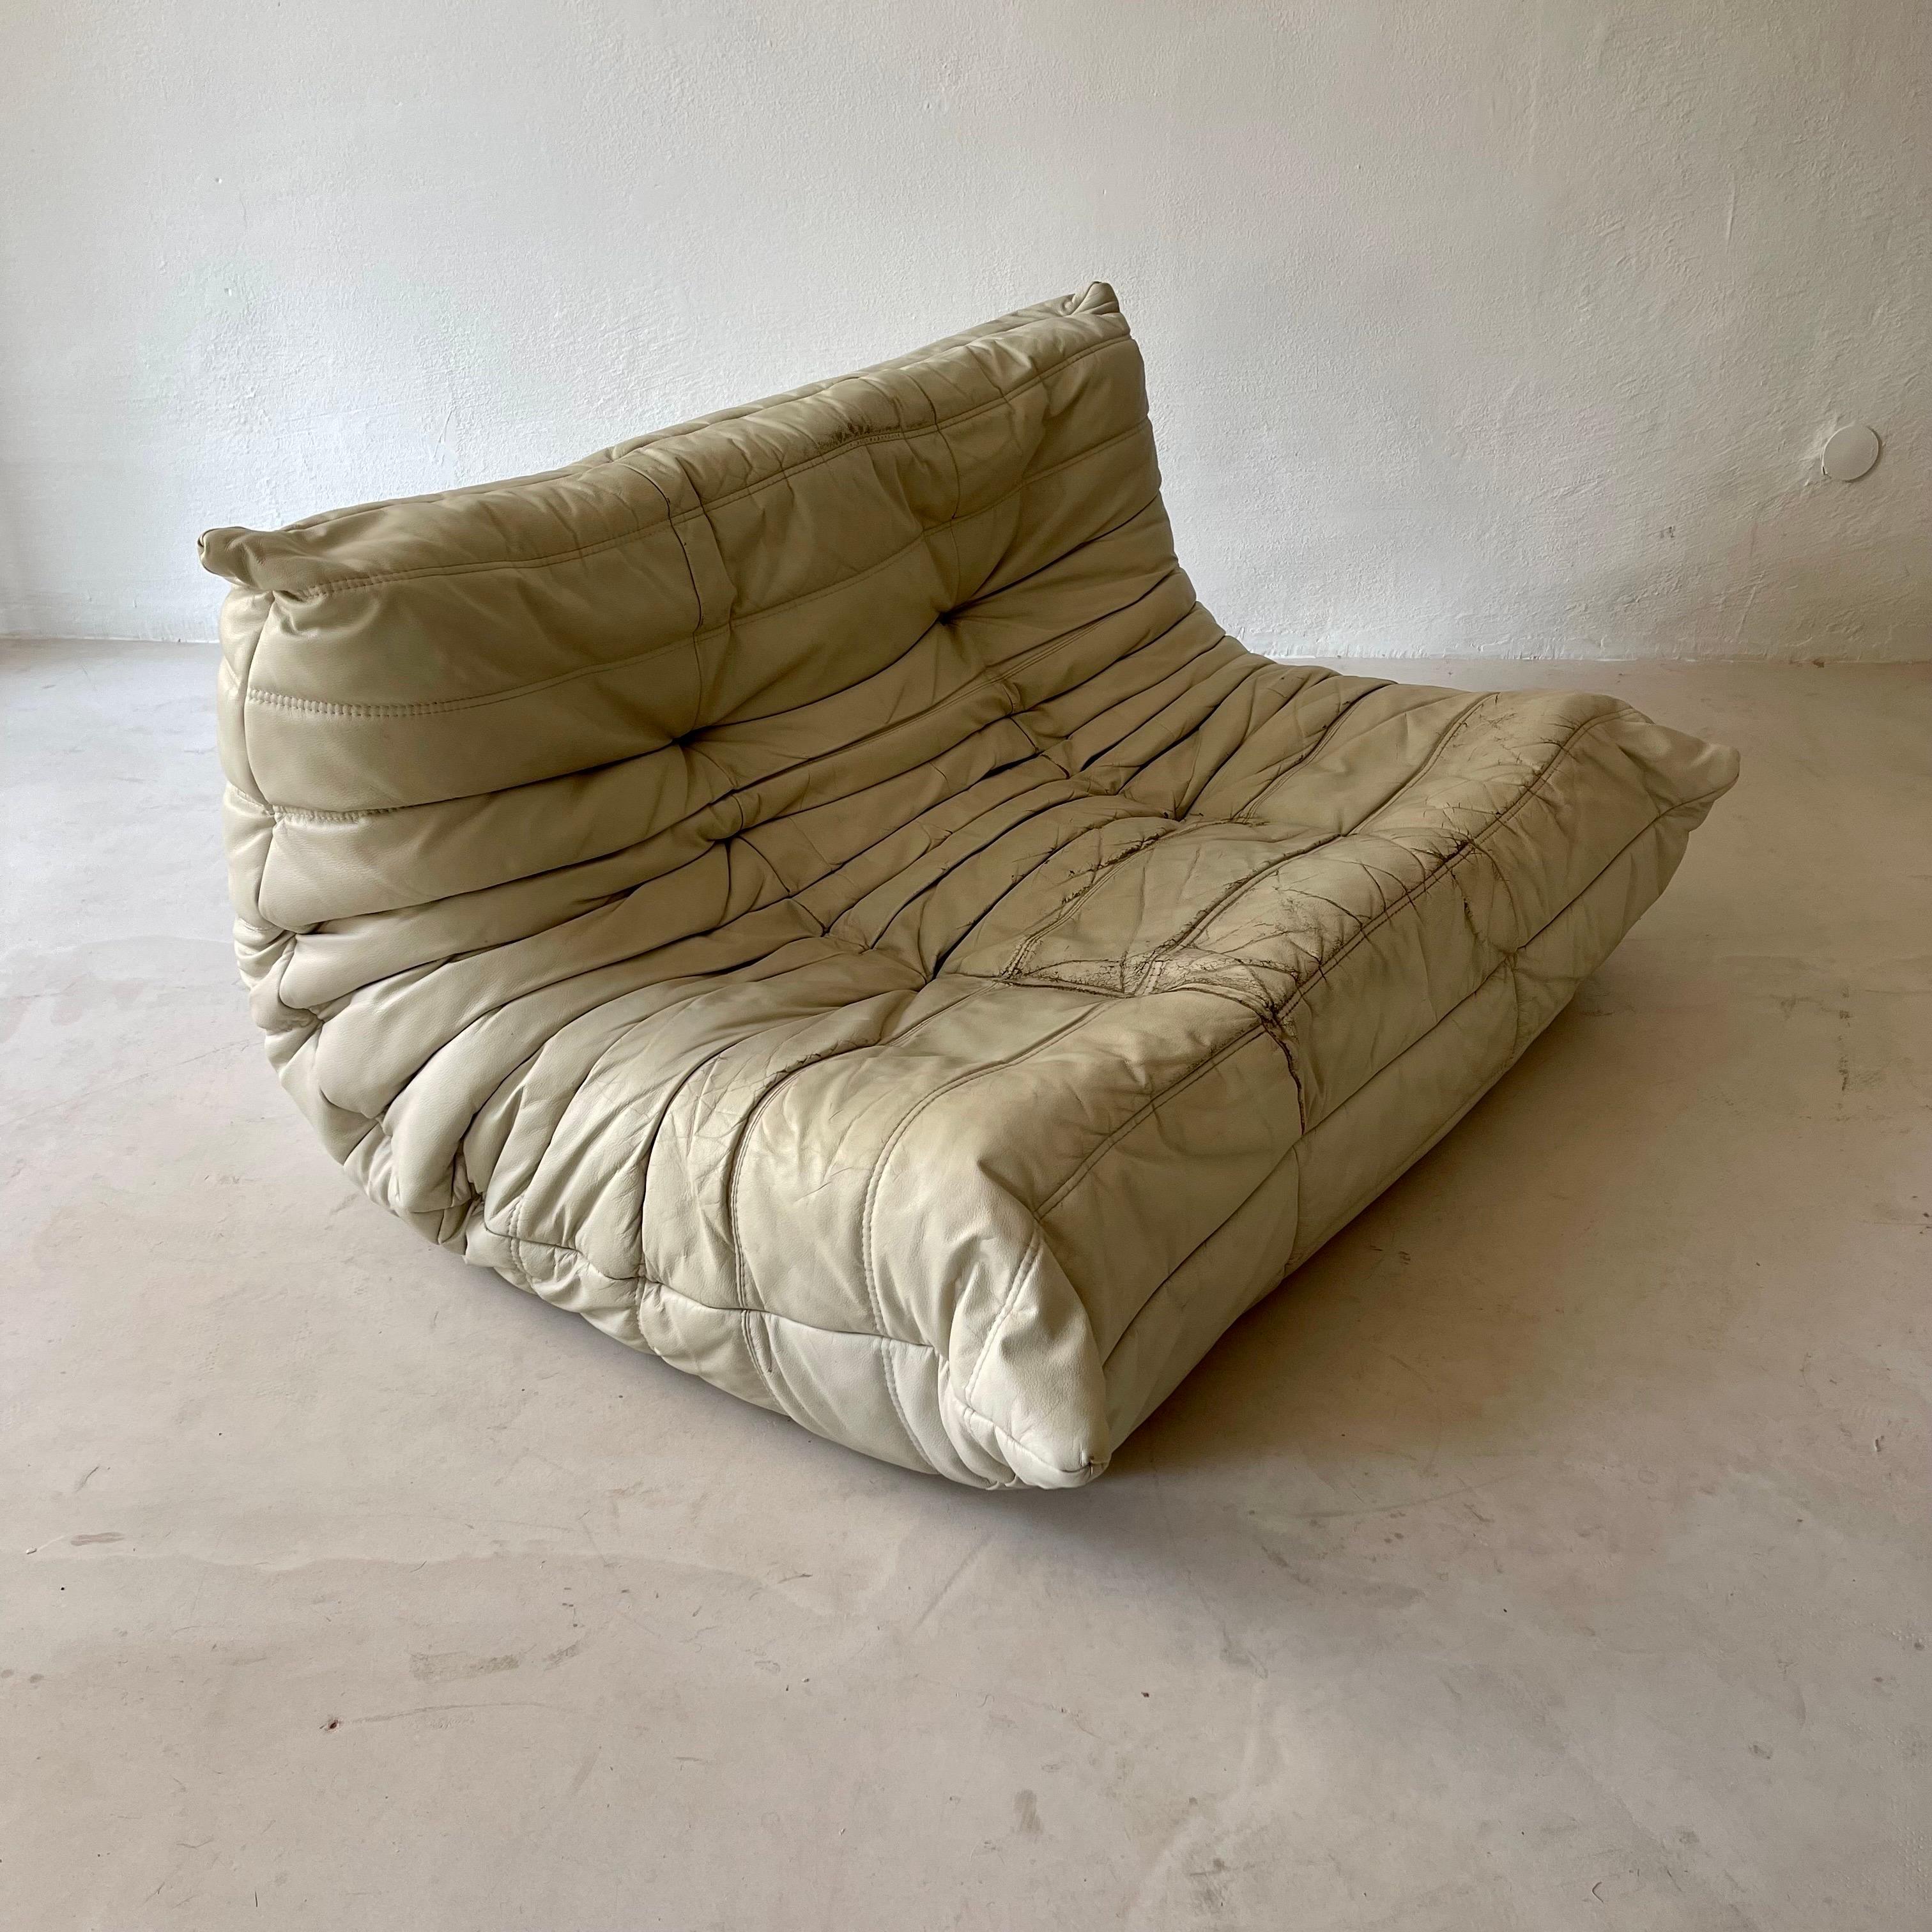 Ligne Roset 'Togo' Signed Authentic in Original Patinated Leather 1970s For Sale 5